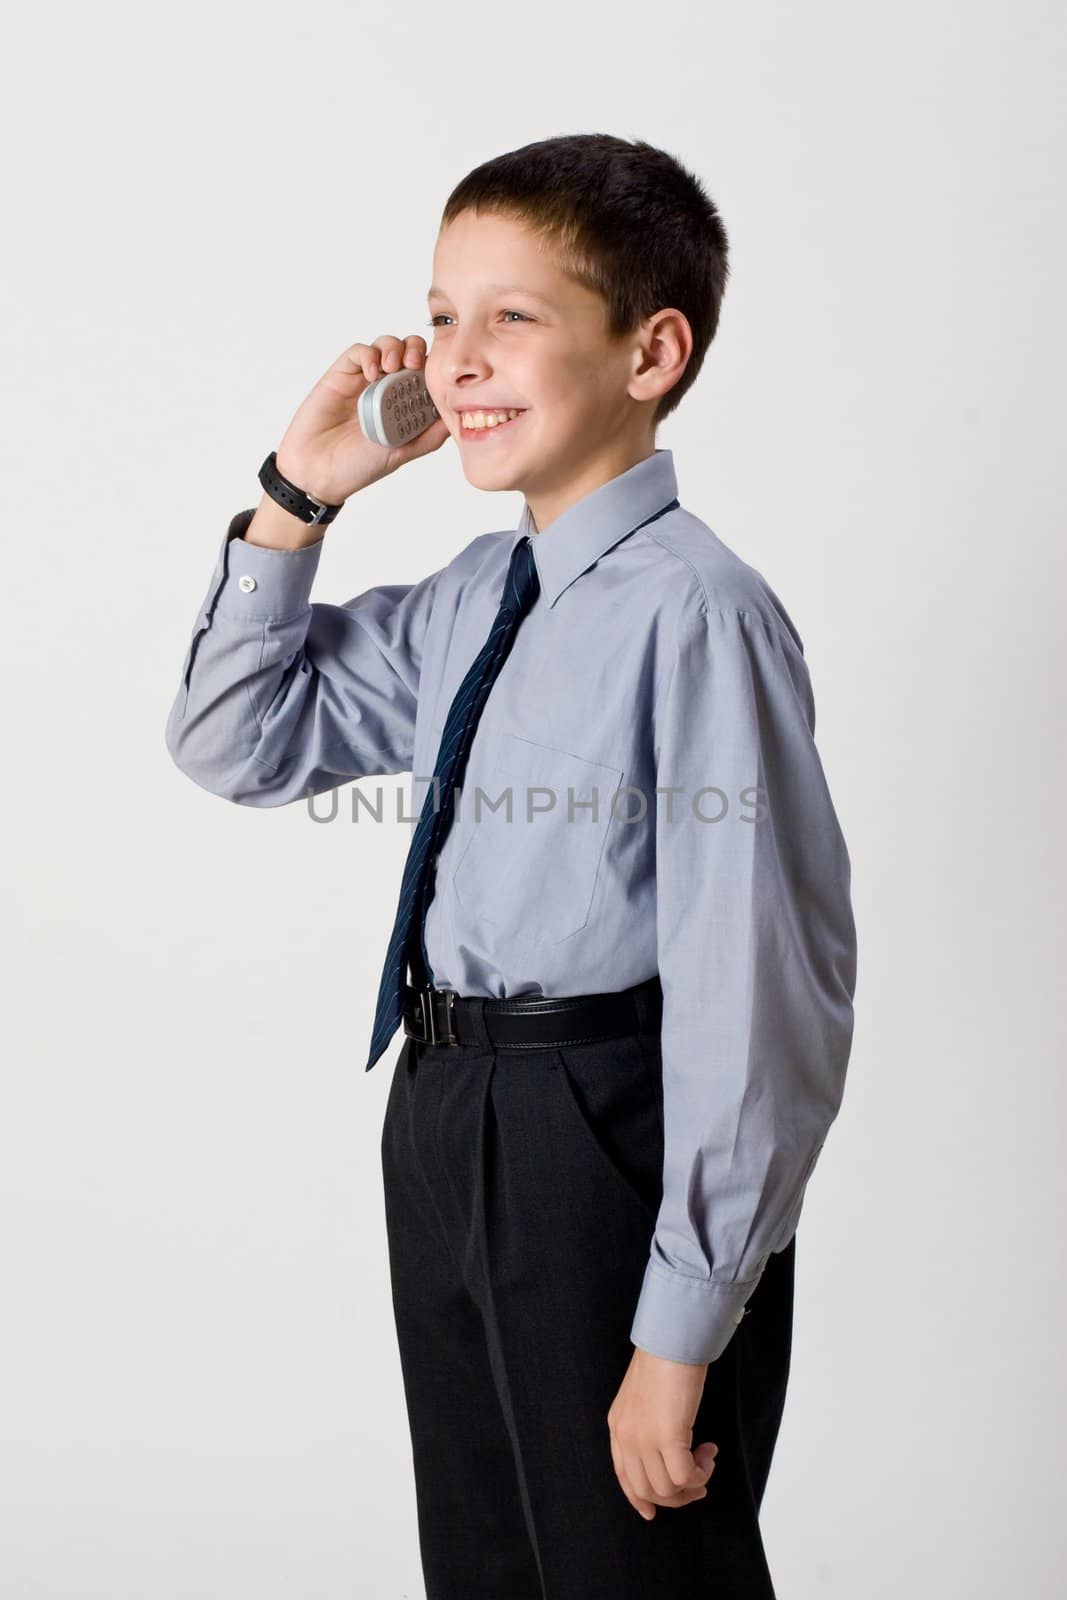 boy with phone by agg